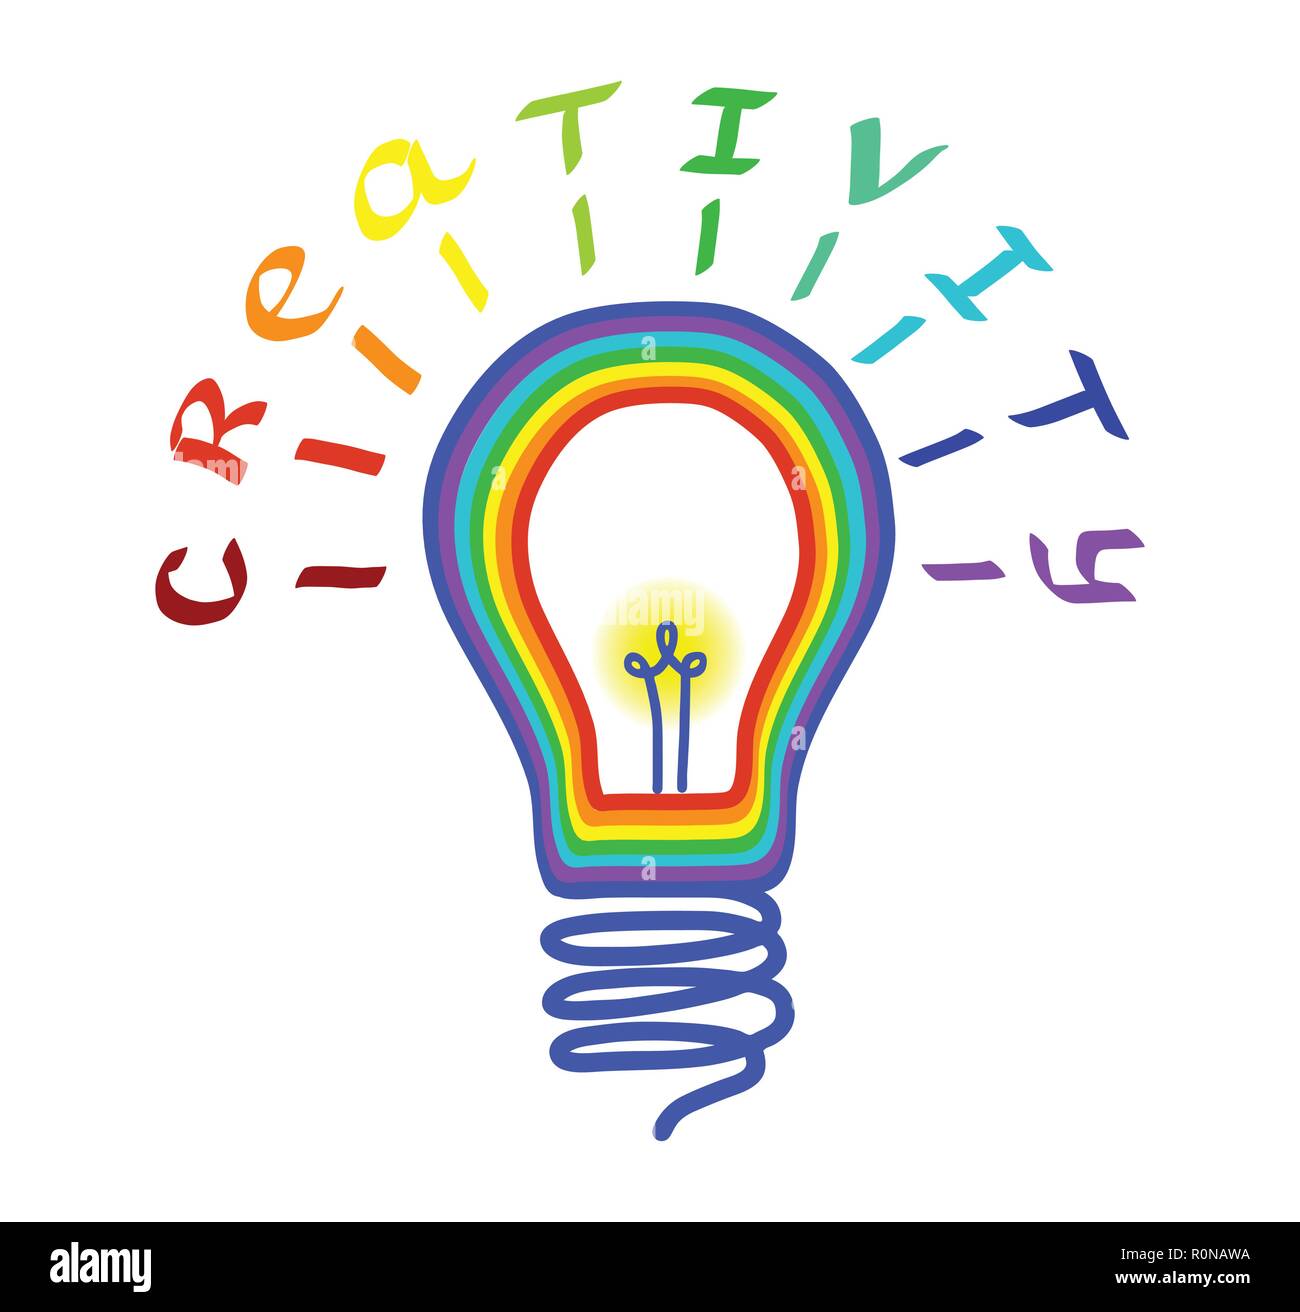 Creativity concept. Light bulb logo with lettering. Concept or creative thinking and unique ideas. Vector illustration Stock Vector